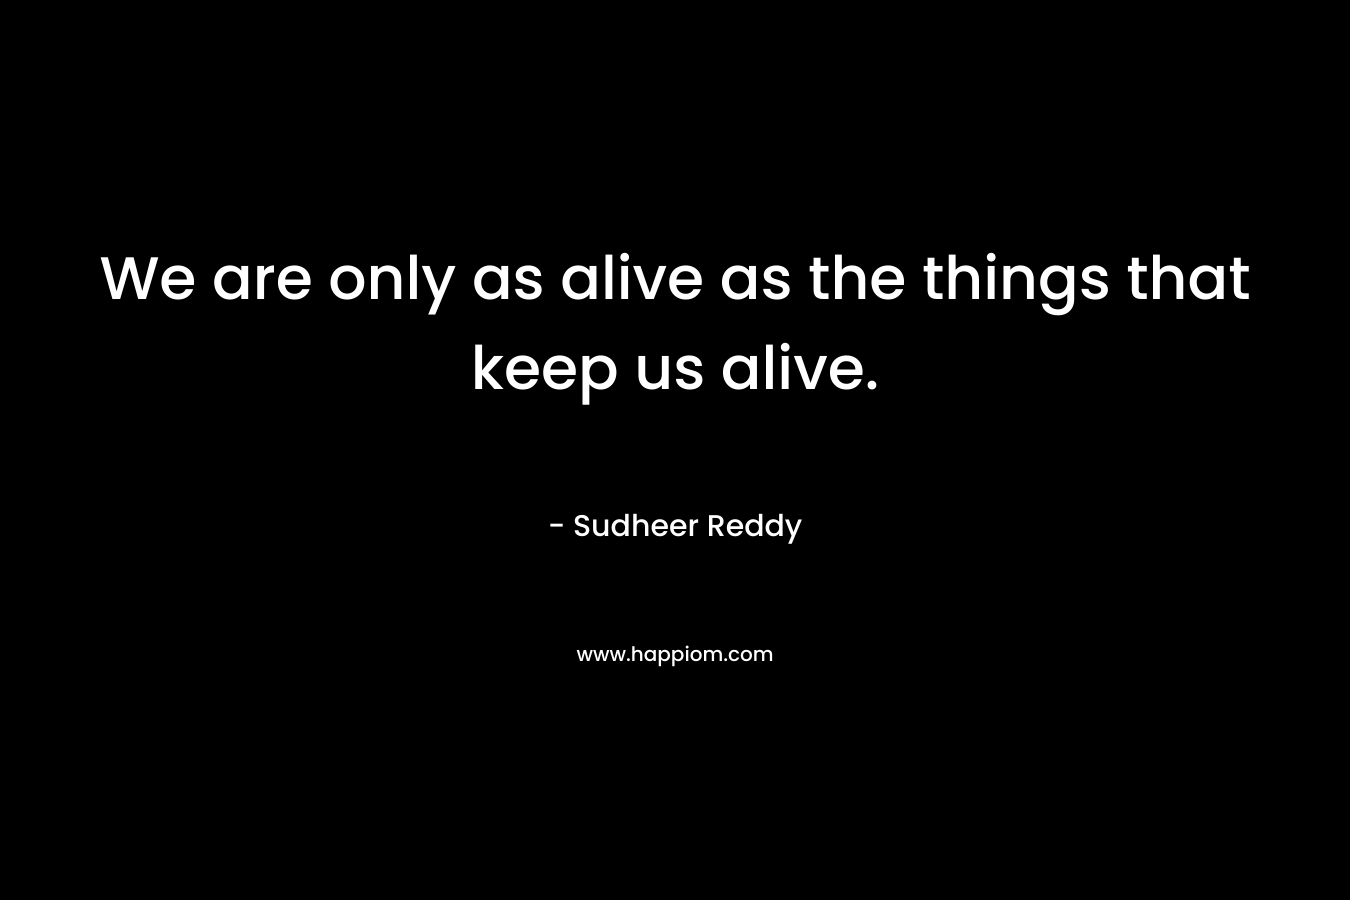 We are only as alive as the things that keep us alive.